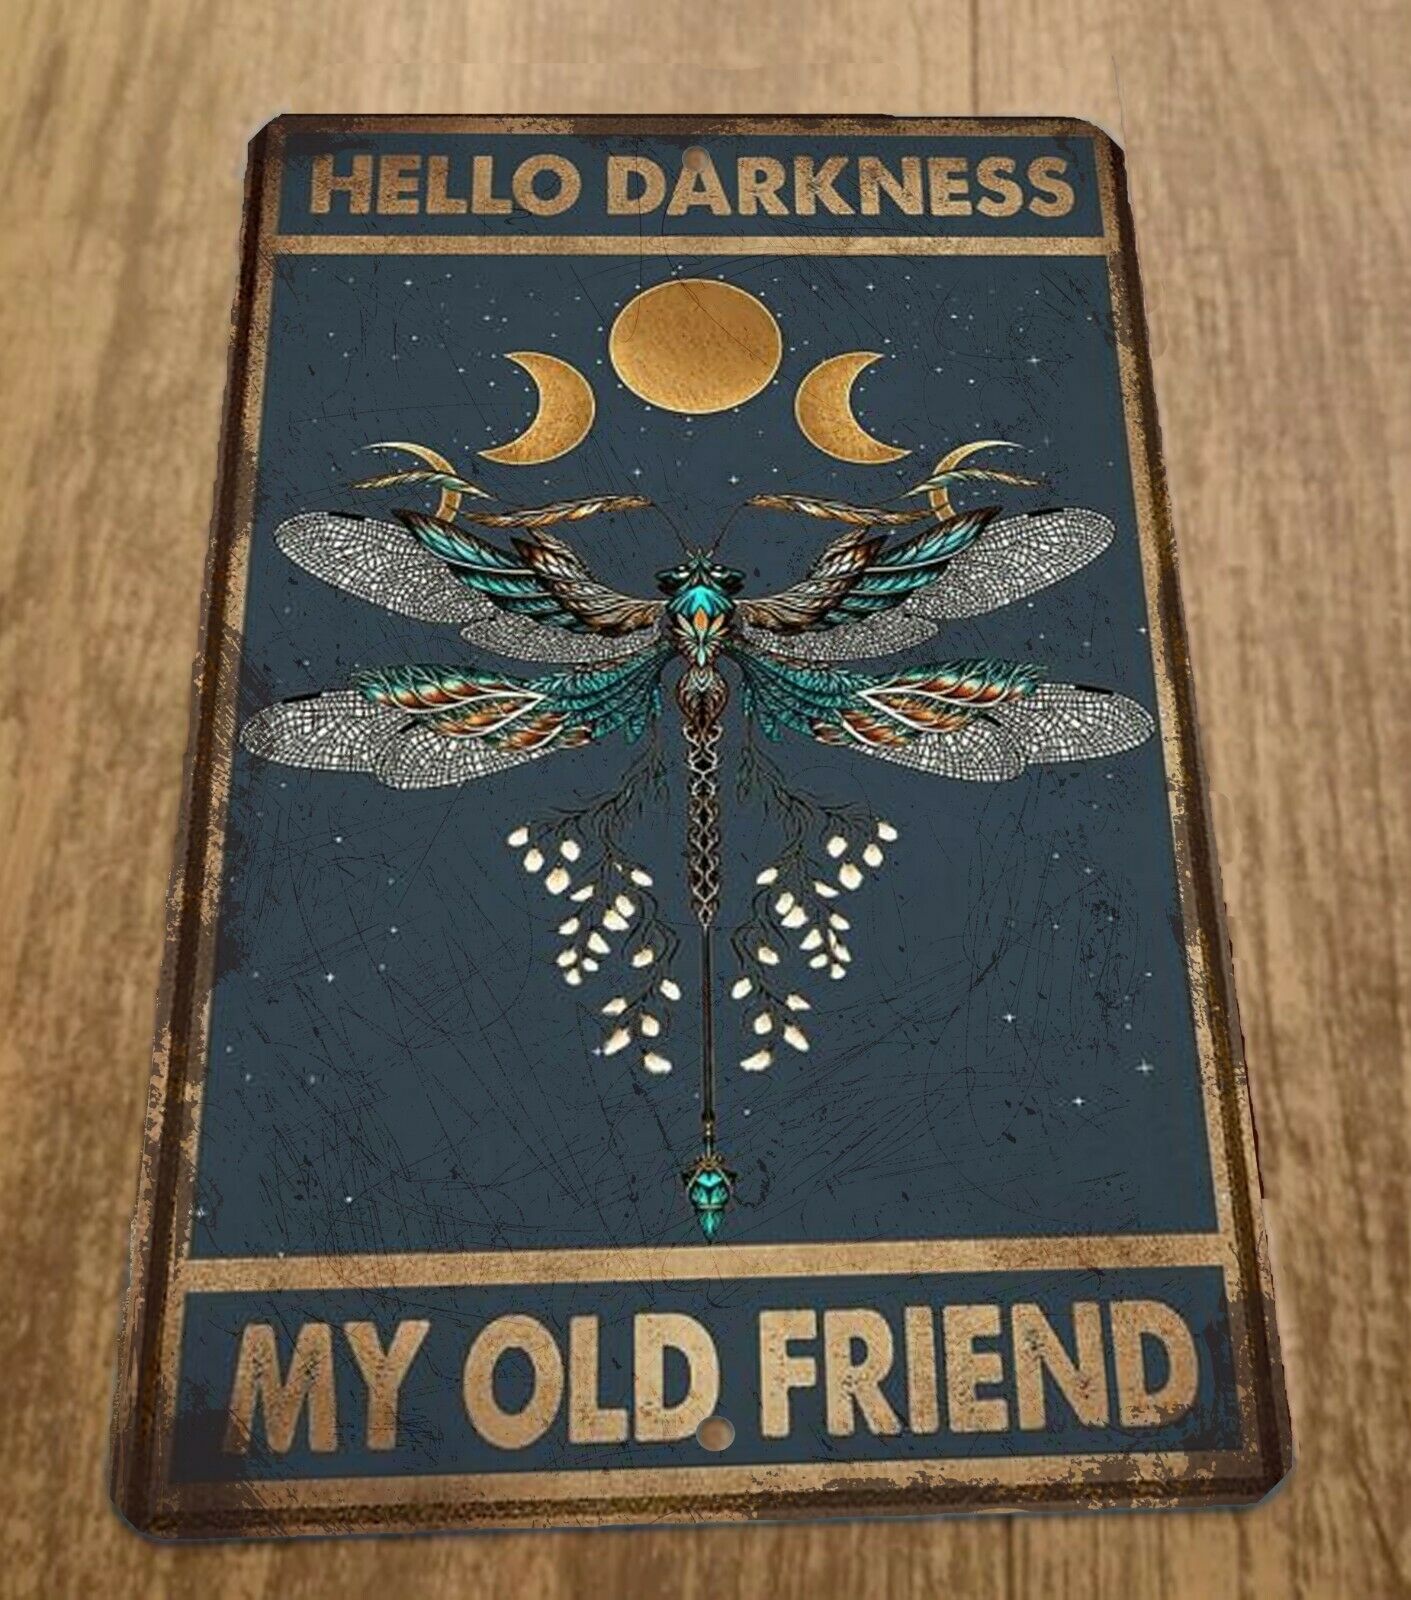 Vintage Looking Hello Darkness My Old Friend 8x12 Metal Wall Sign